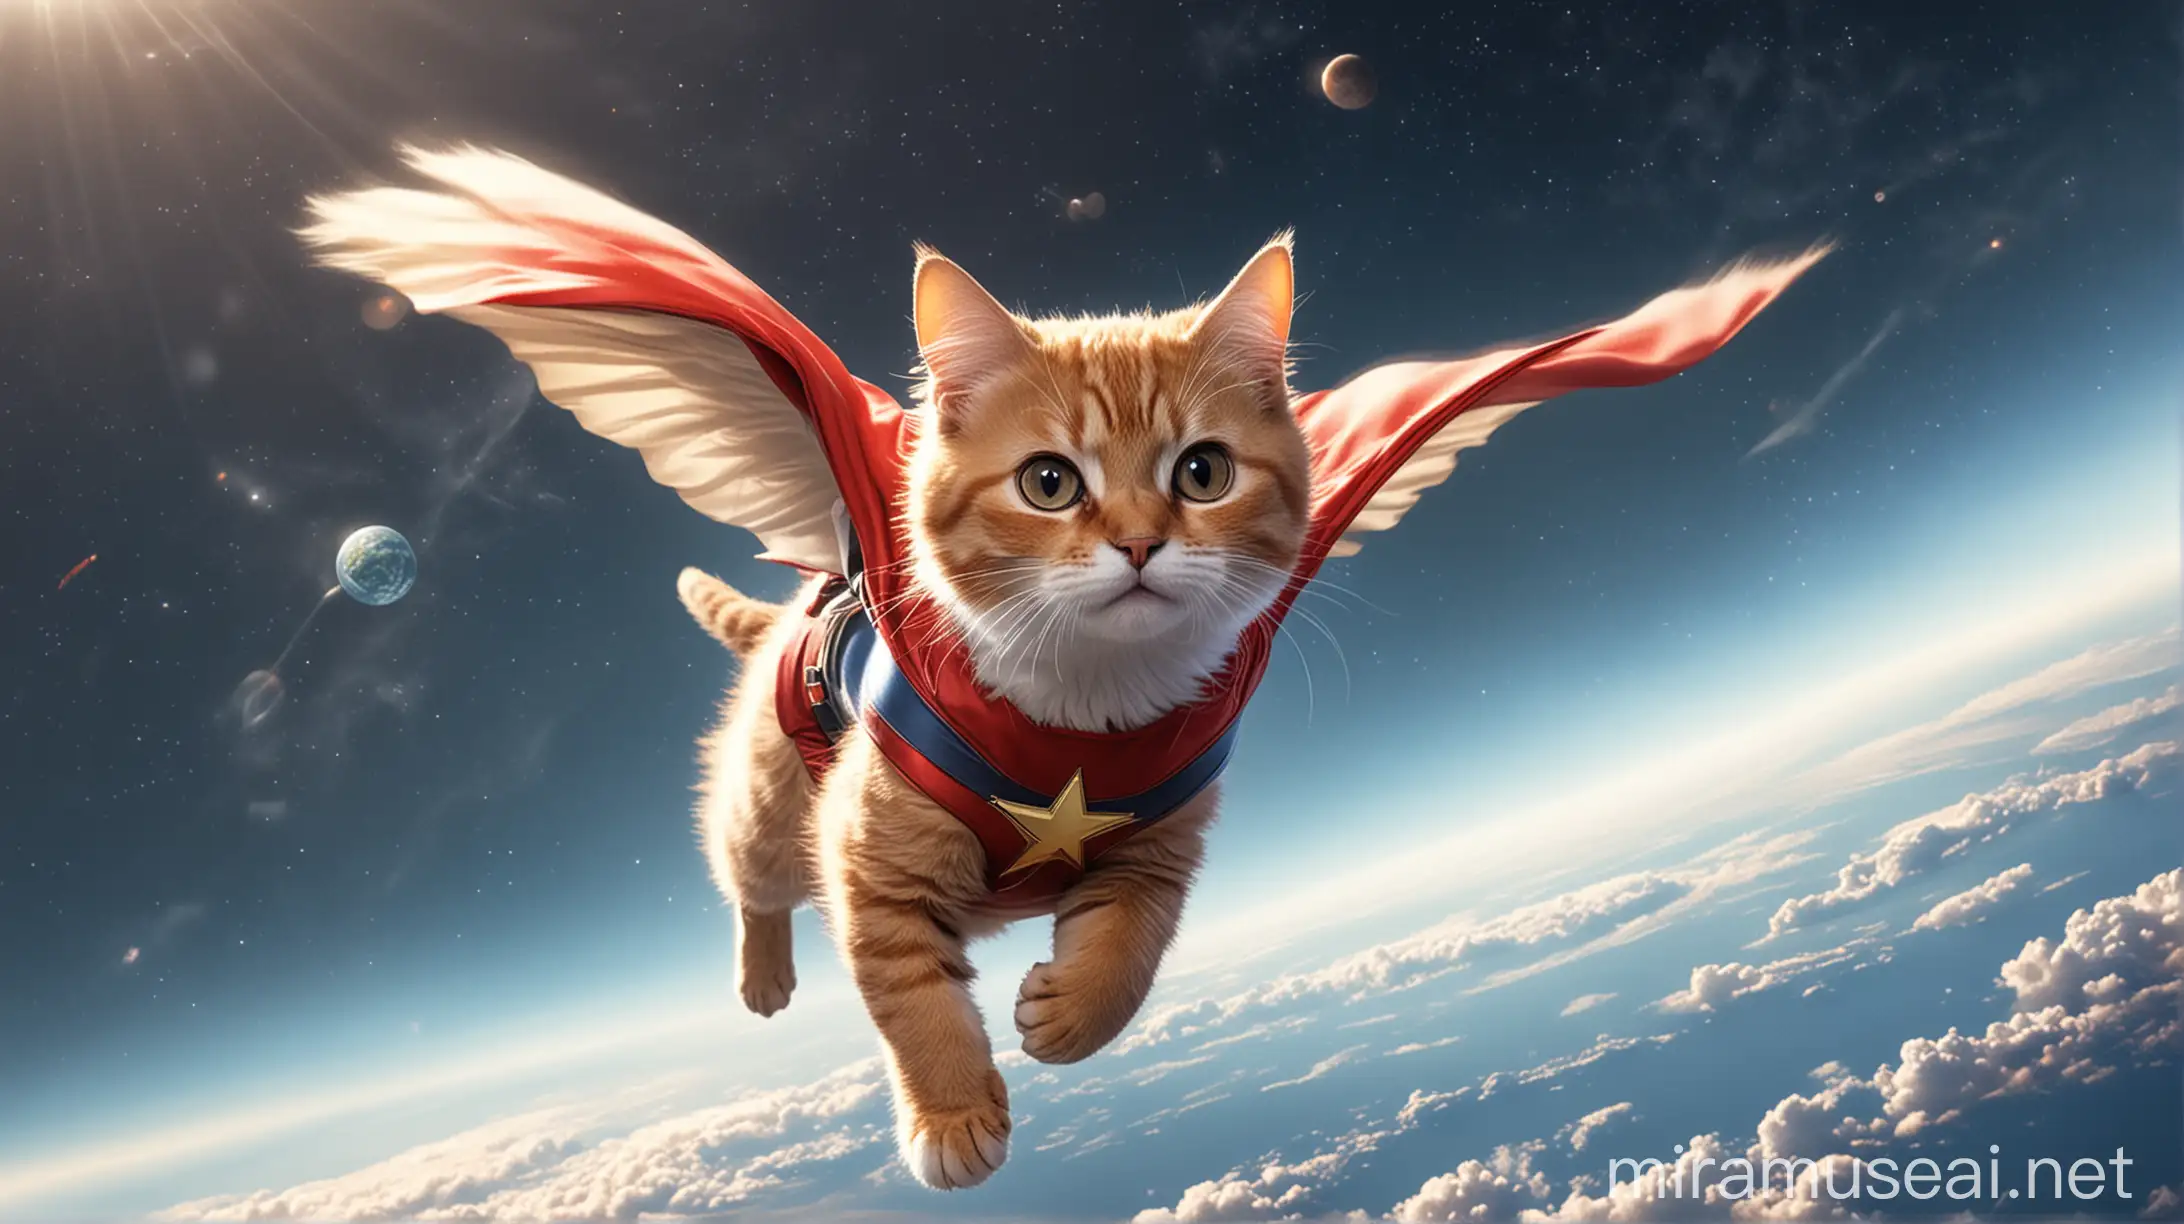 Adorable Superhero Cat Flying Over Earth